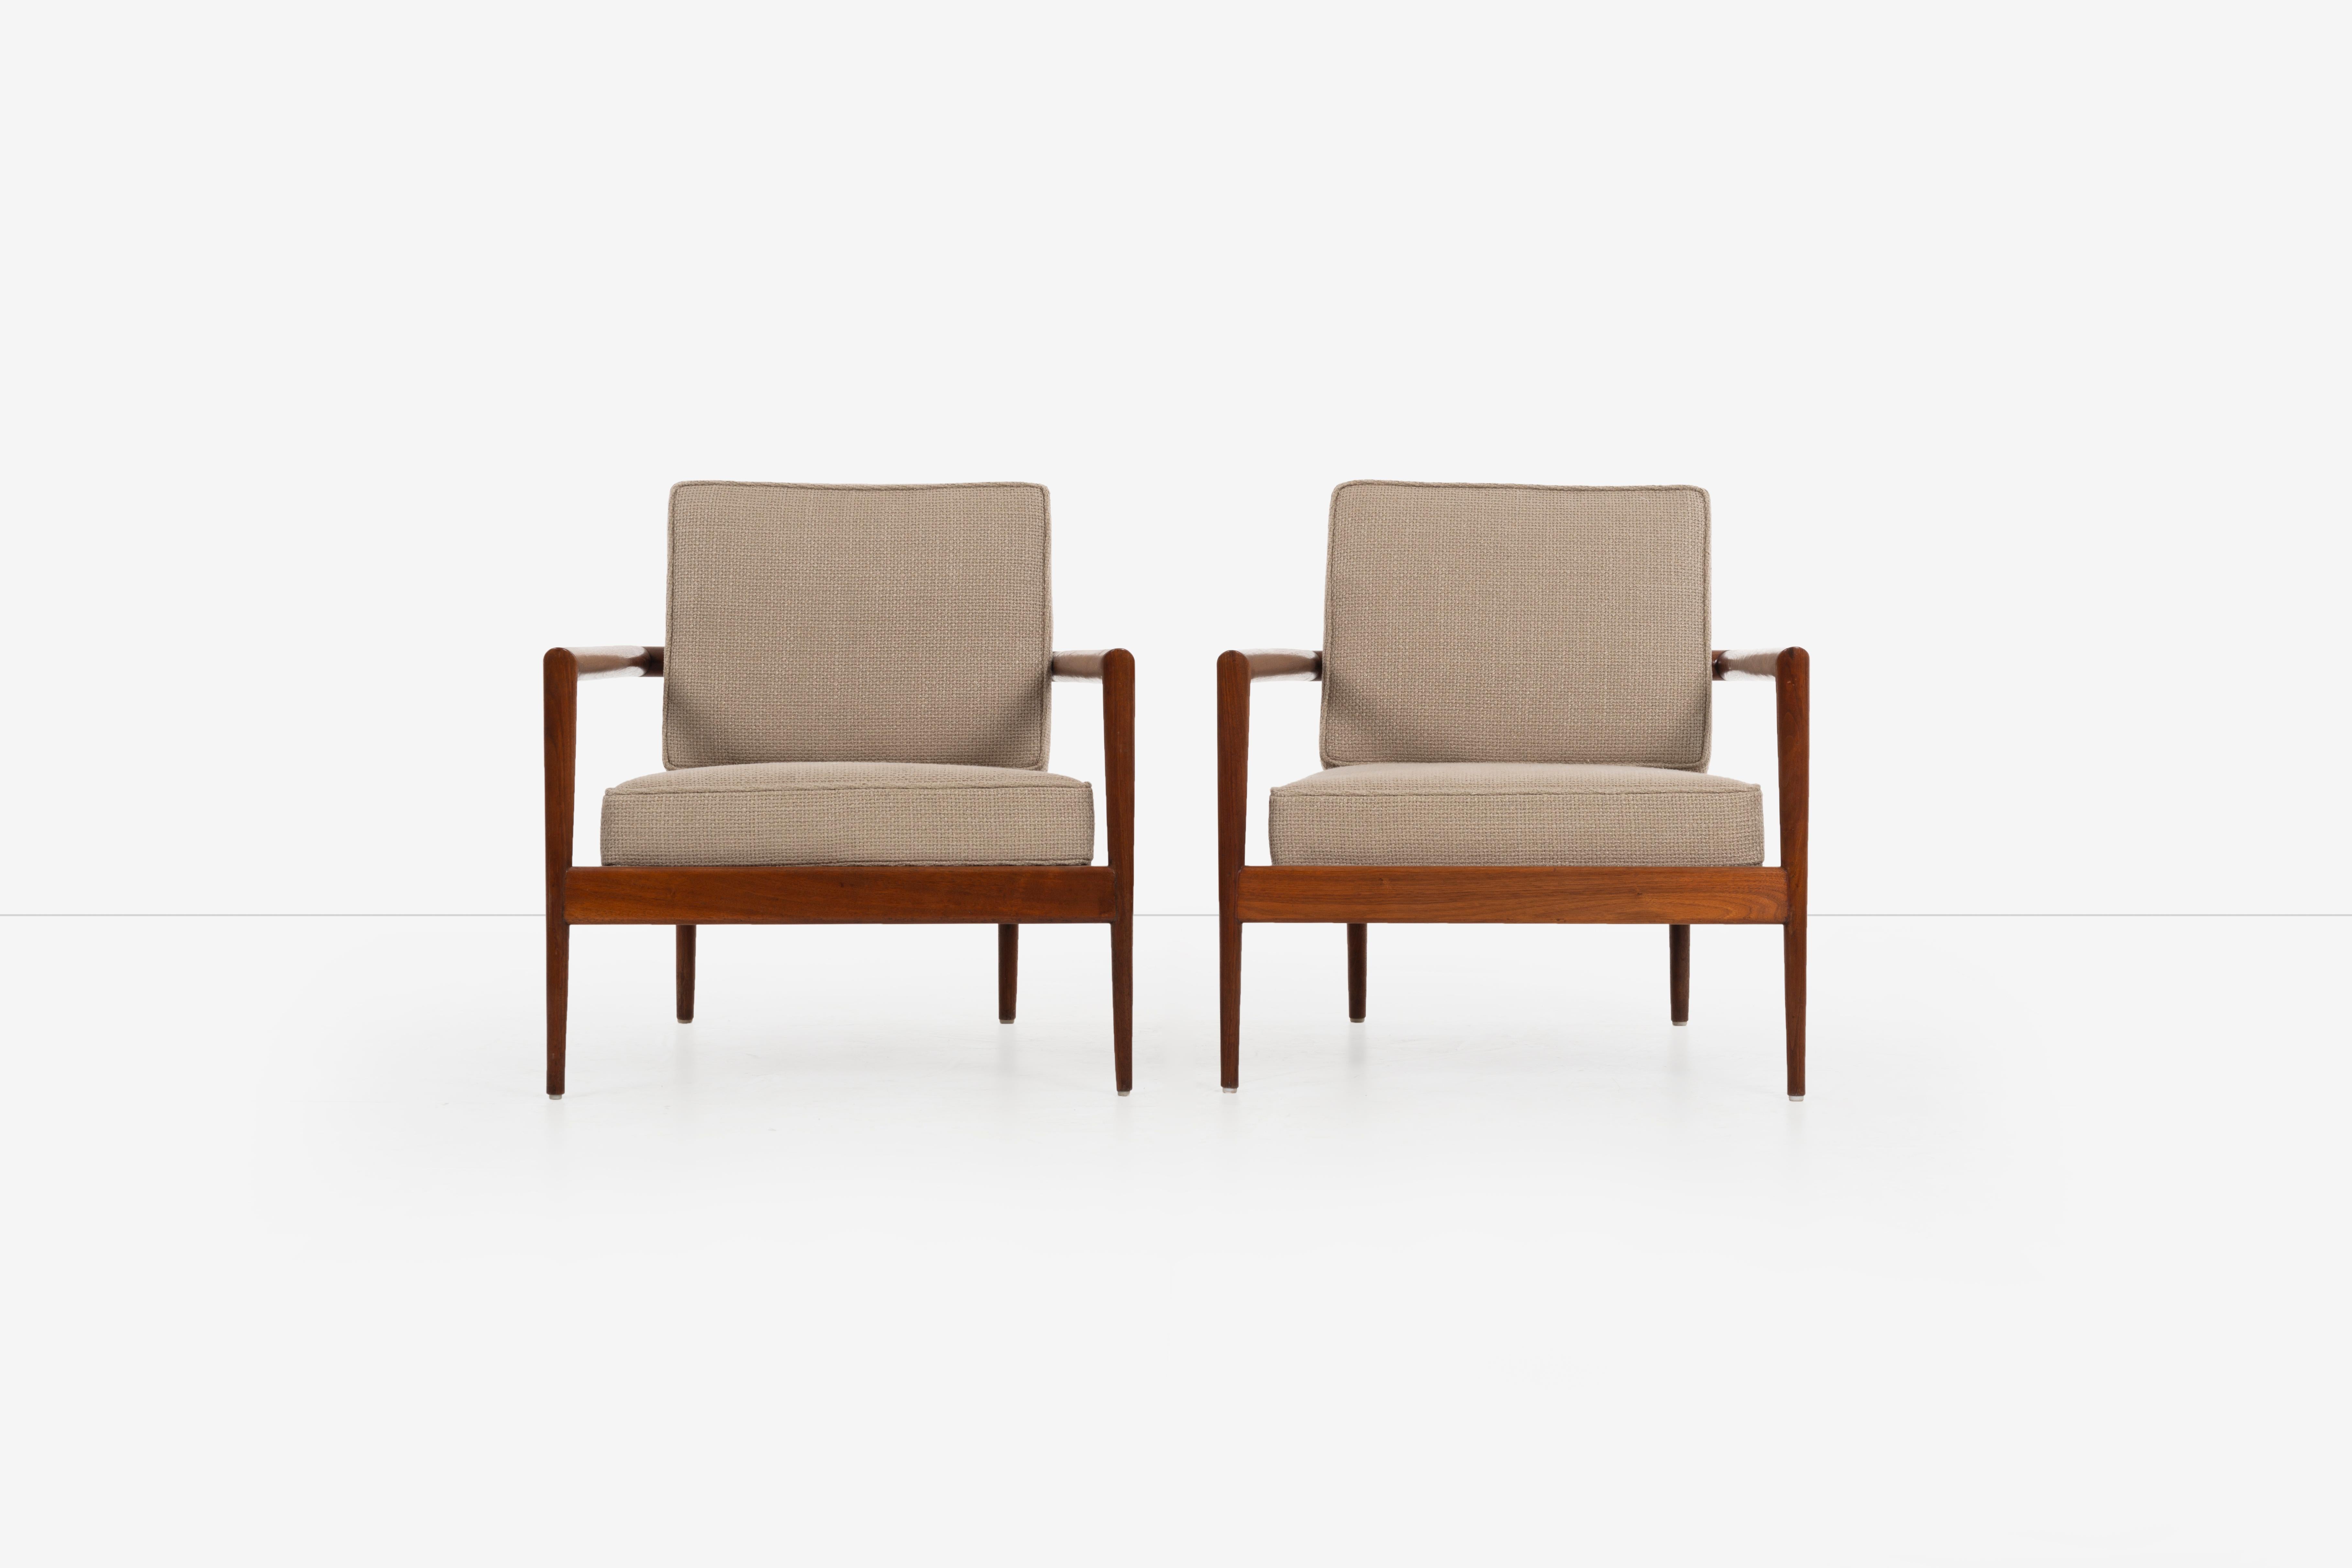 Edmond J. Spence lounge chairs, solid walnut frames, Windsor style back with loose cushion seat and back reupholstered with Great Plains [SONOMA: PEAT HEATHER
1479/14].